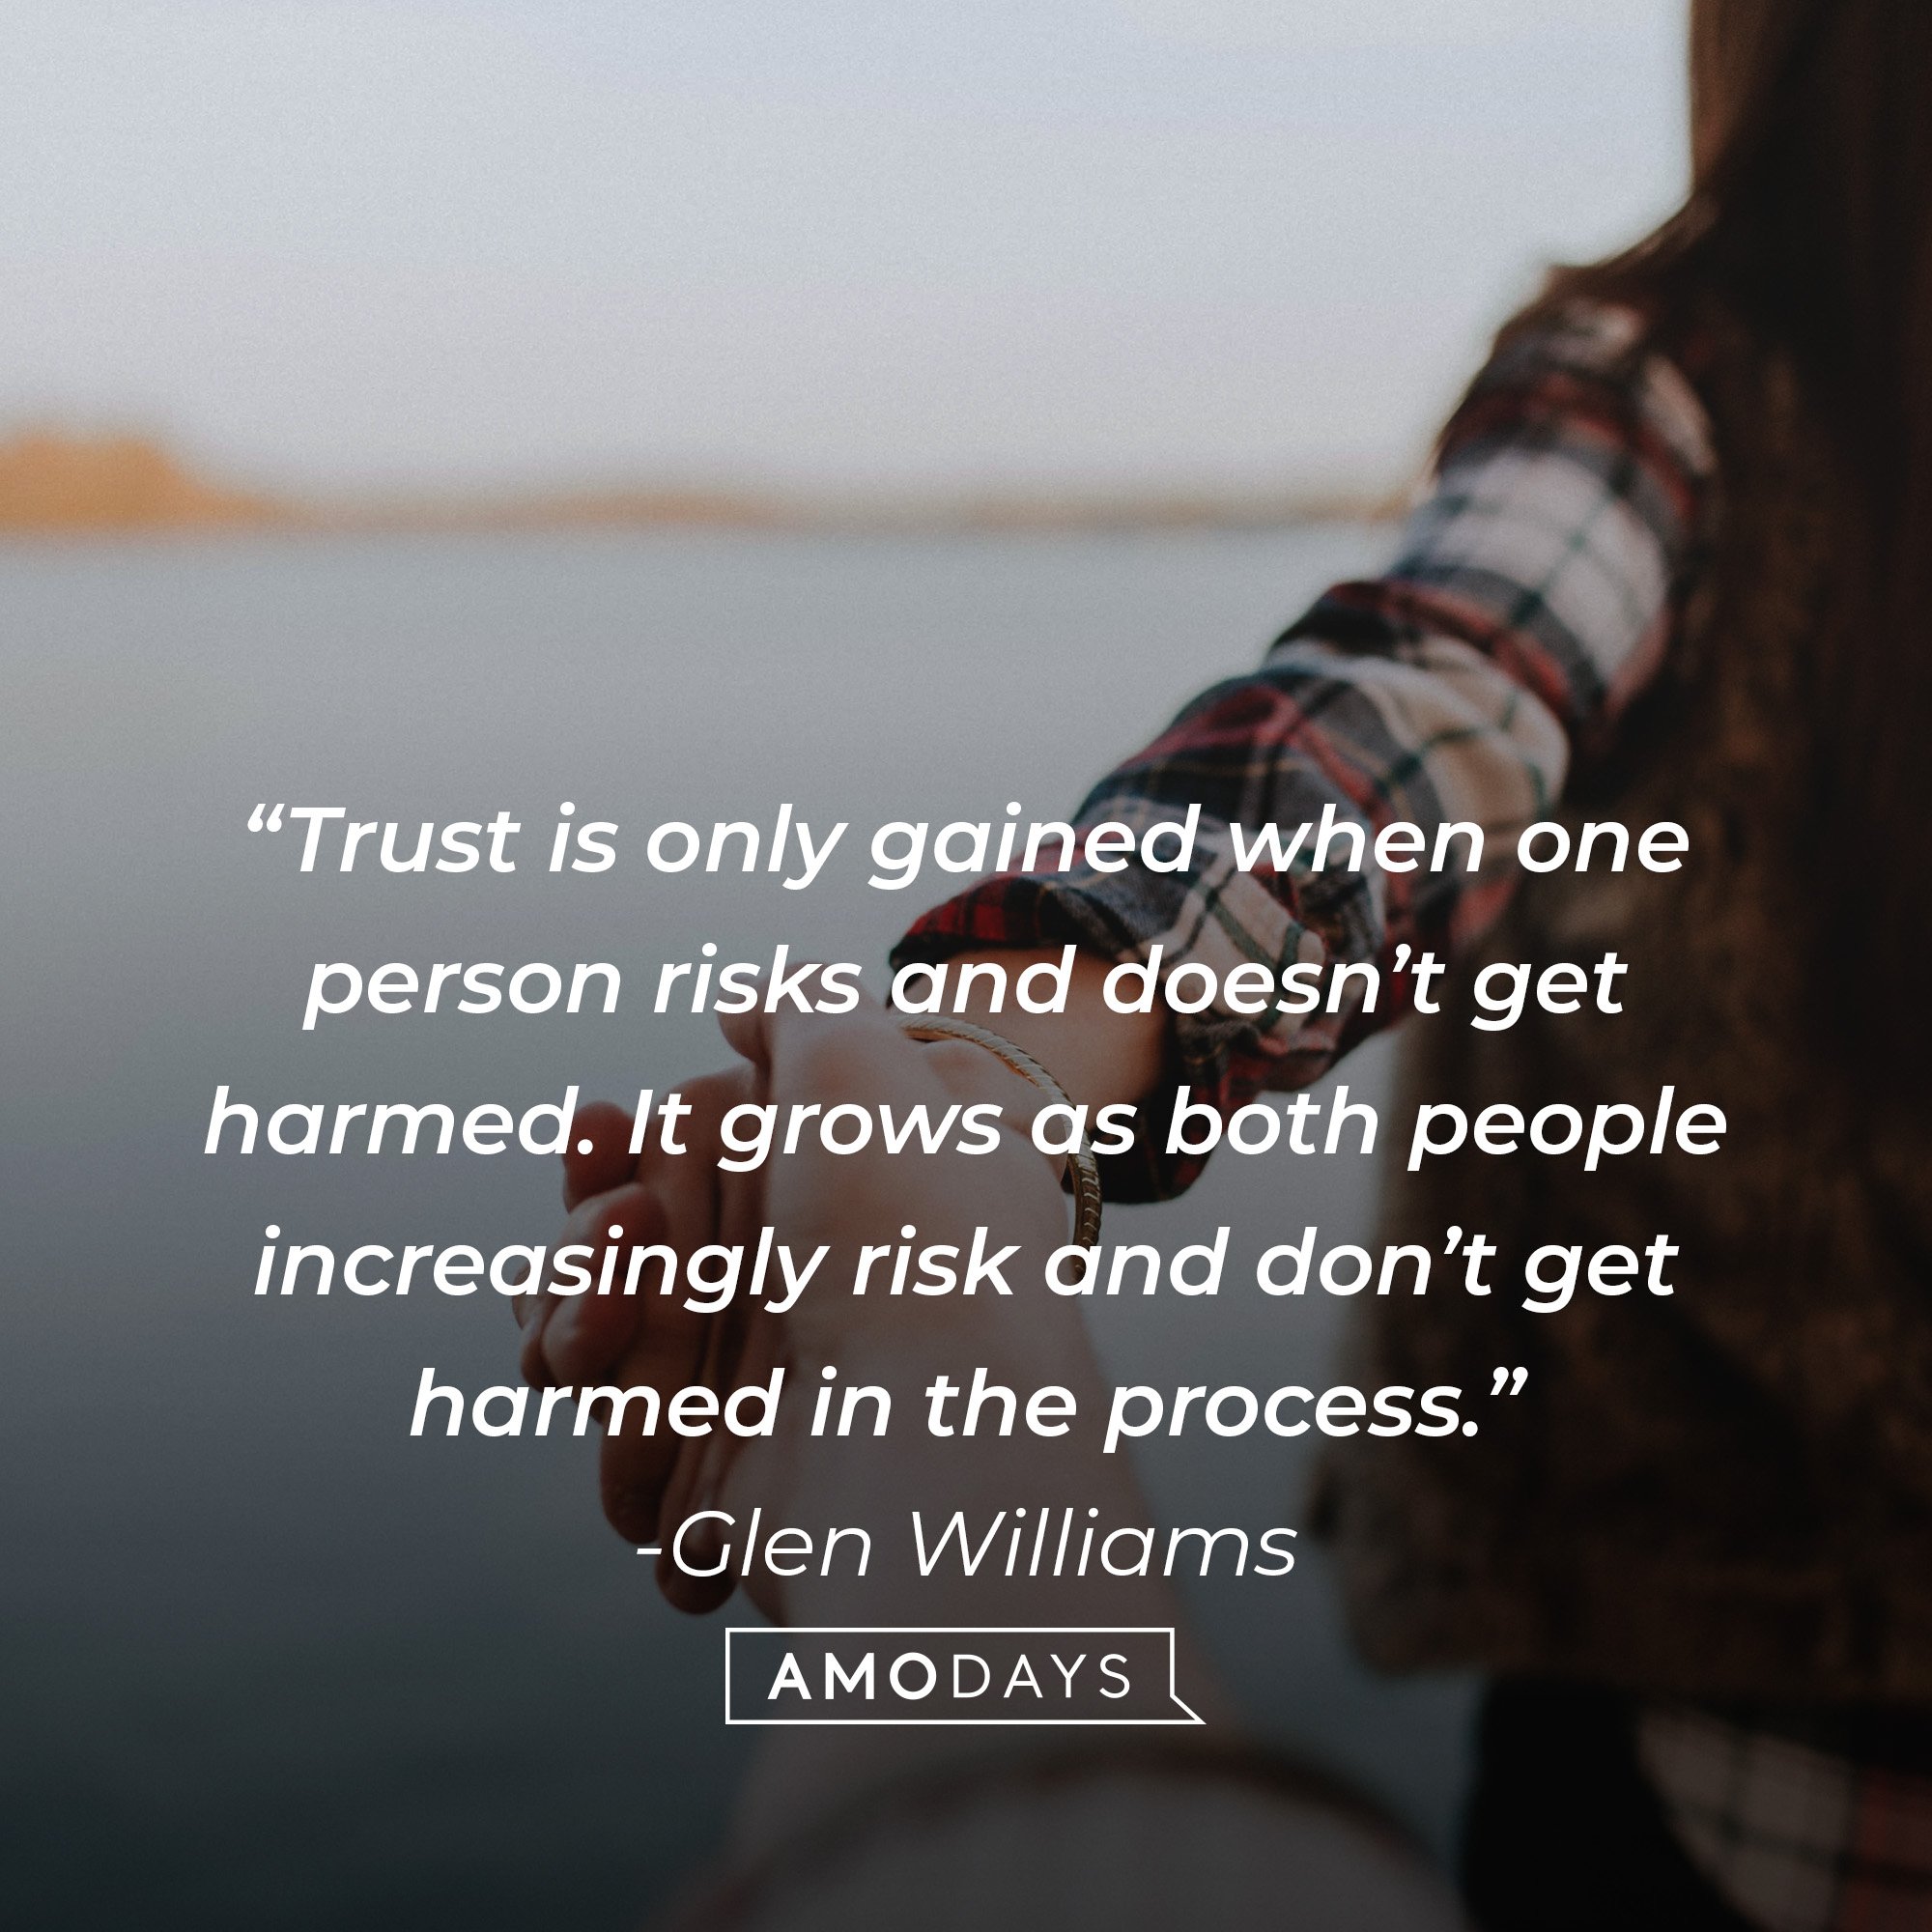 Glen Williams’ quote: “Trust is only gained when one person risks and doesn’t get harmed. It grows as both people increasingly risk and don’t get harmed in the process.” | Image:  AmoDays  